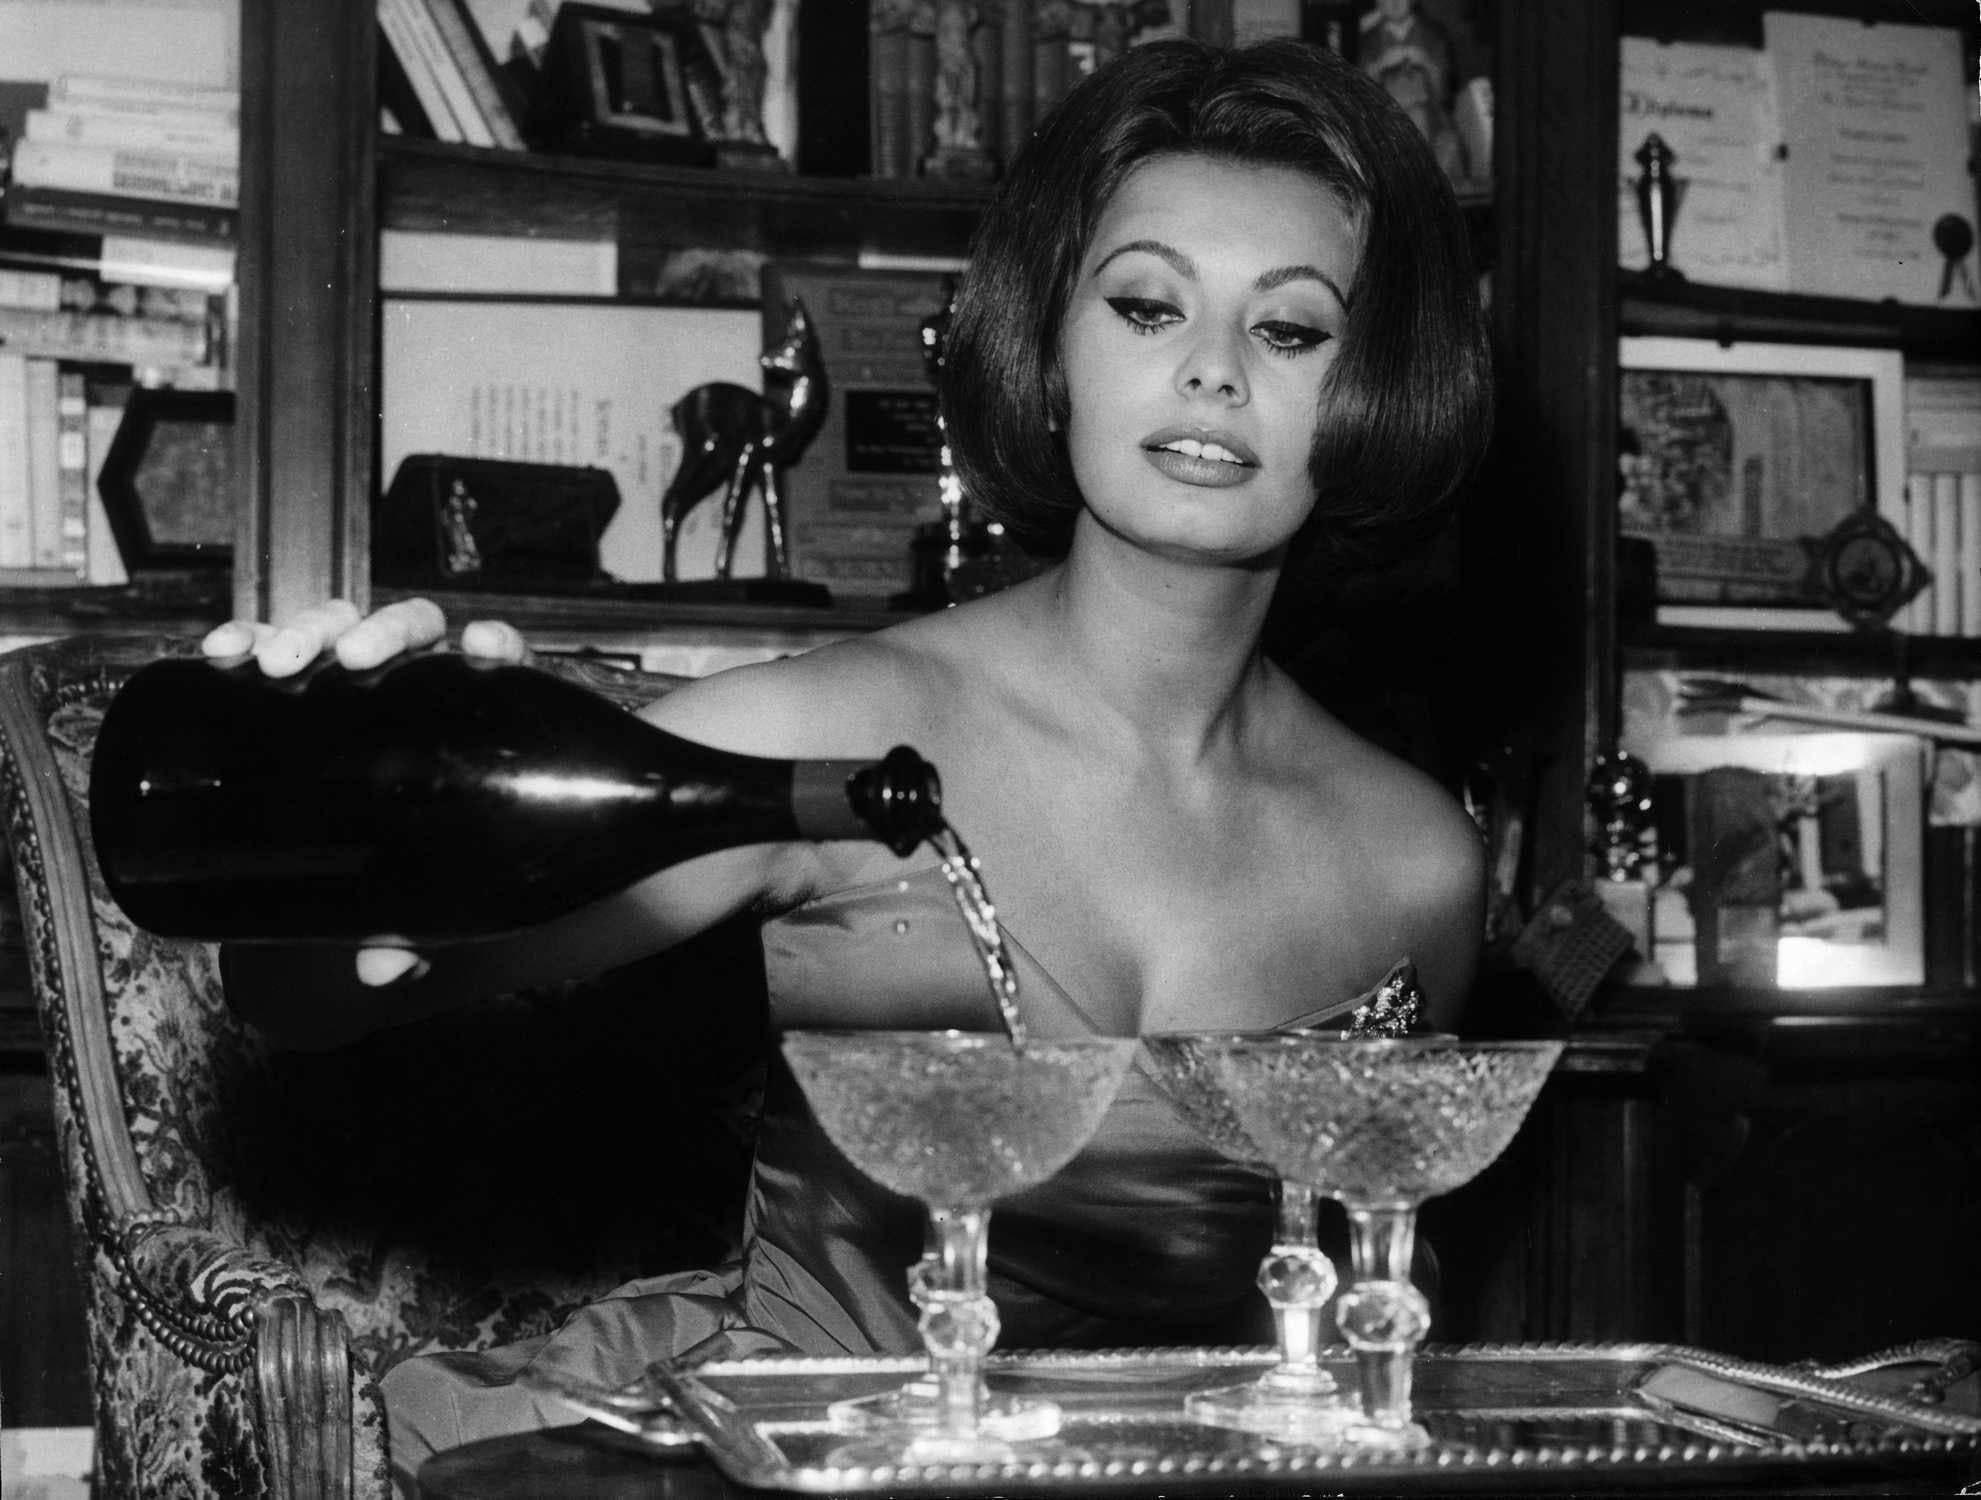 Unknown Black and White Photograph - Sophia Loren Pouring Champagne on New Year's Eve Globe Photos Fine Art Print